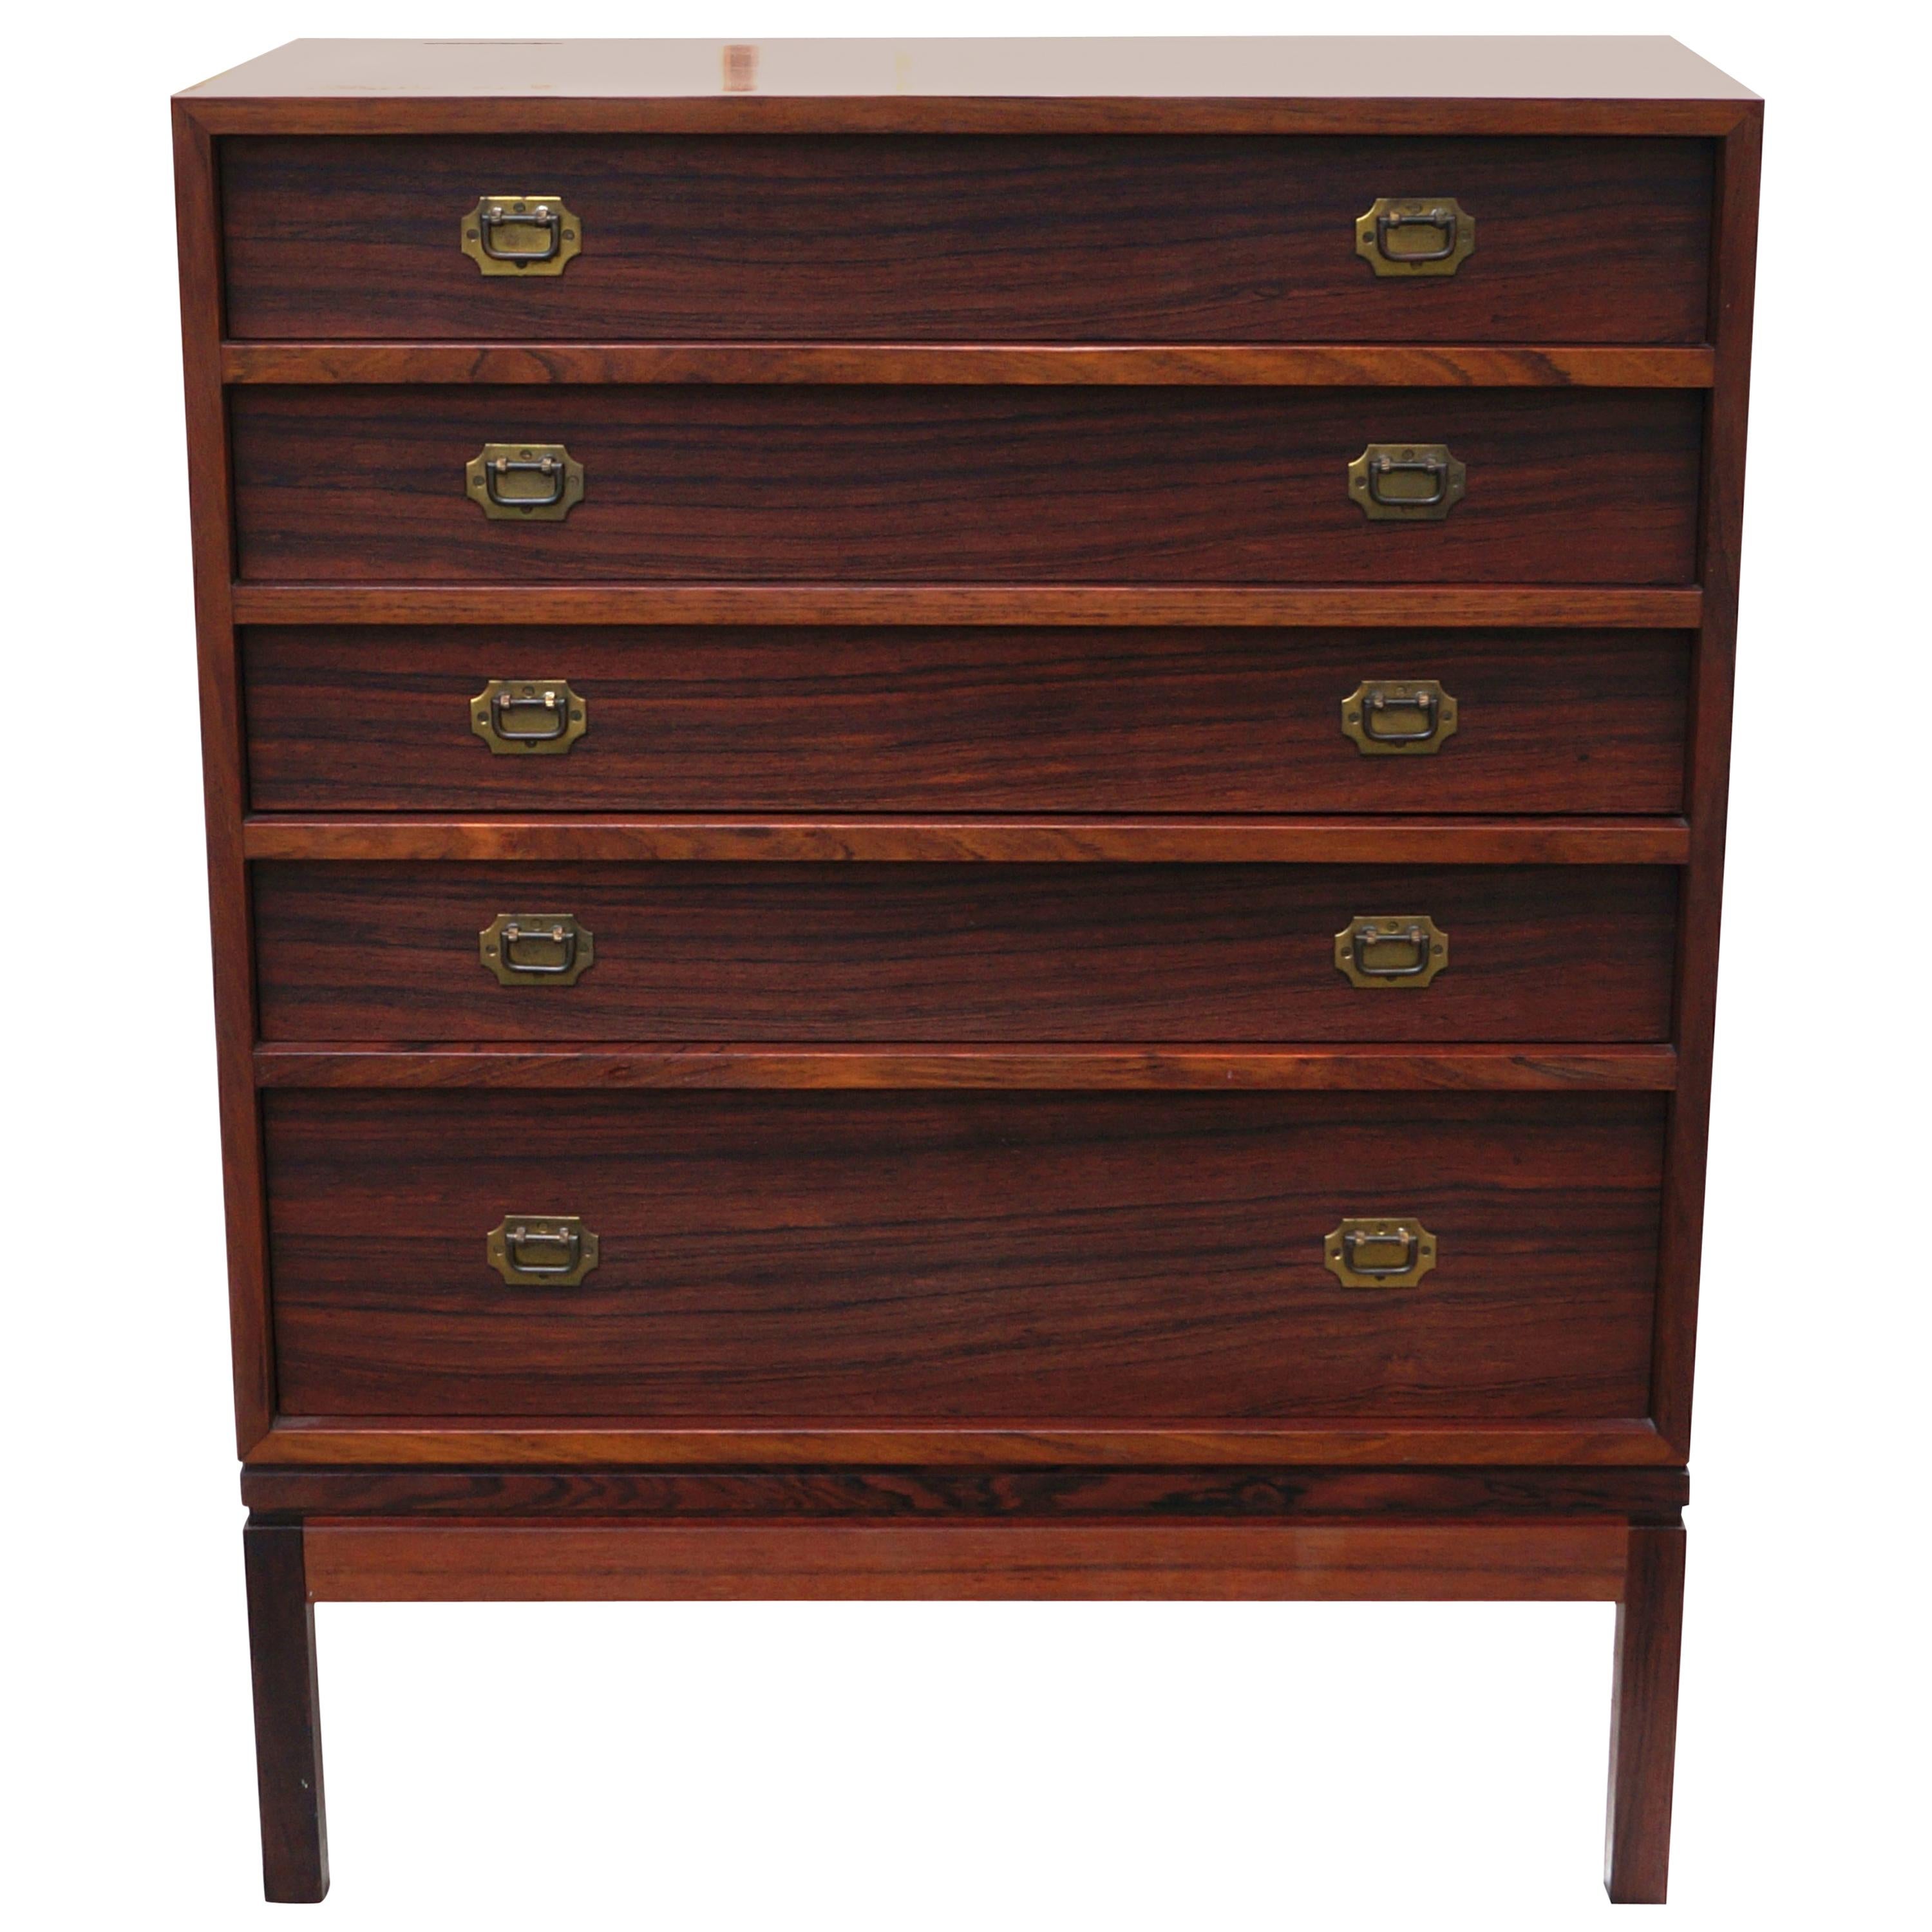 Henning Korch Rosewood Campaign Jewelry Lingerie Chest Dresser Flat File